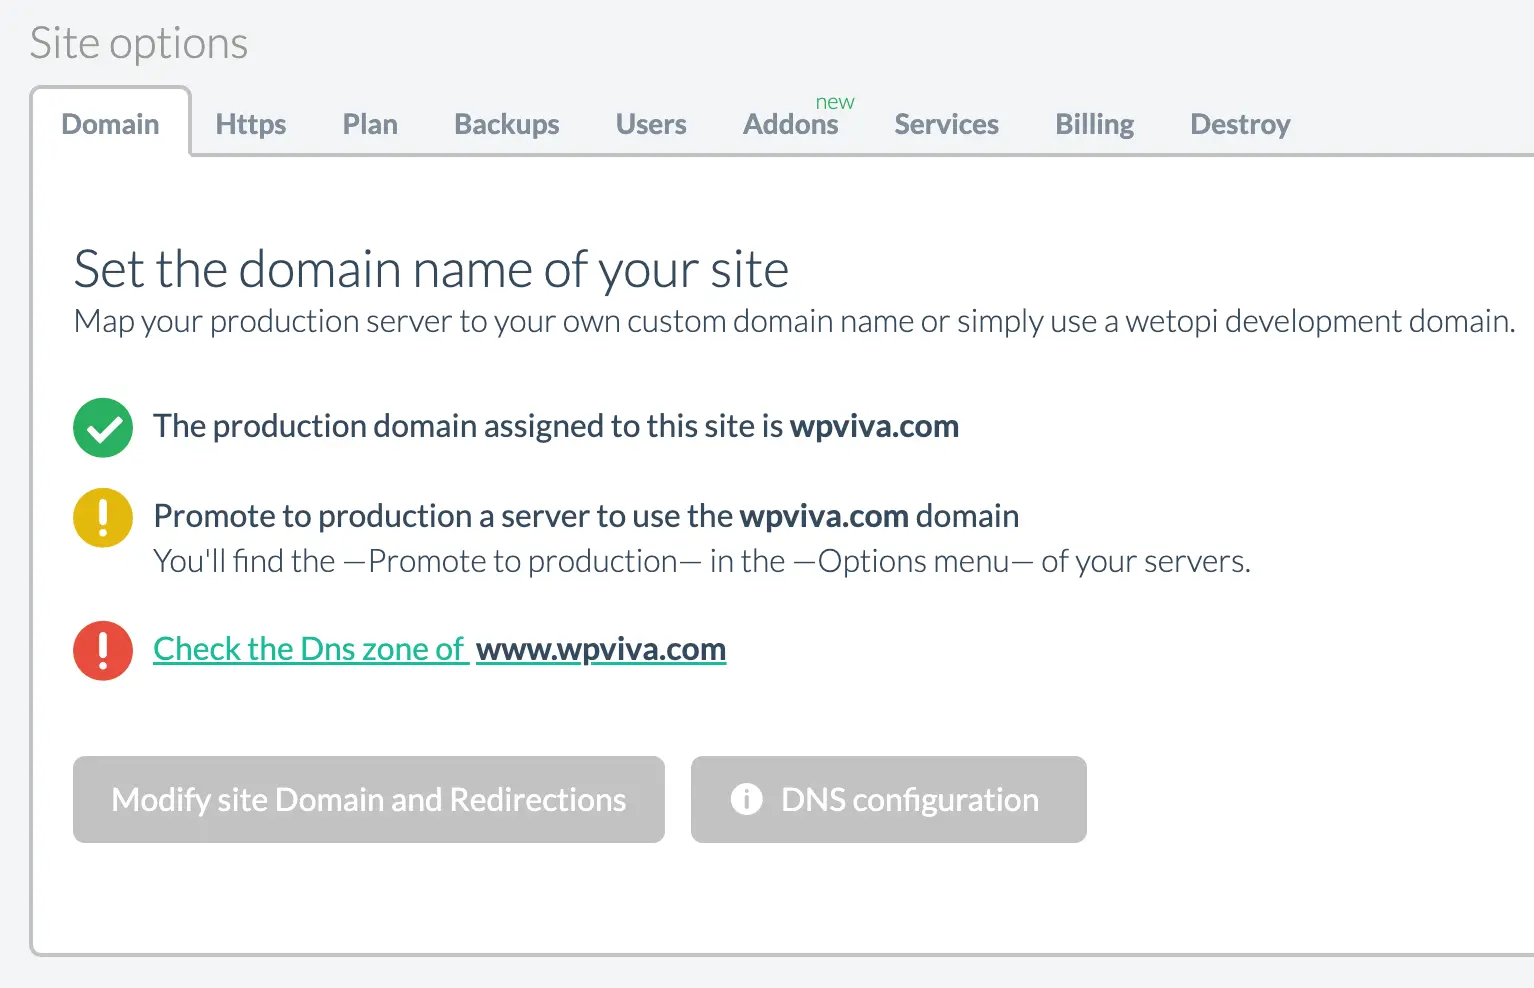 Check the DNS zones of your domain